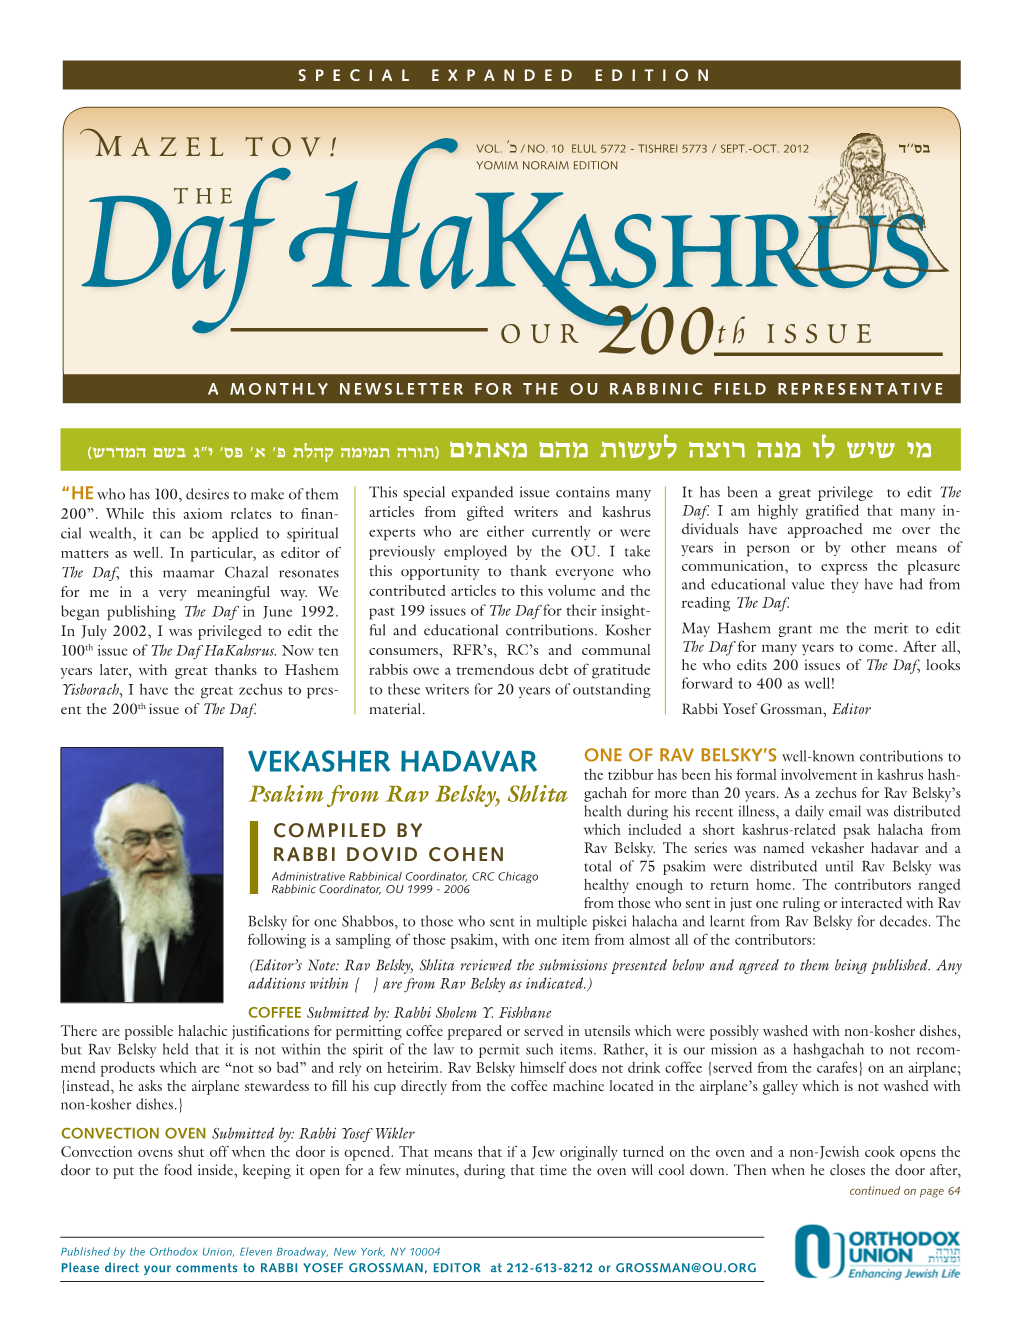 MAZEL TOV! OUR 200Th ISSUE